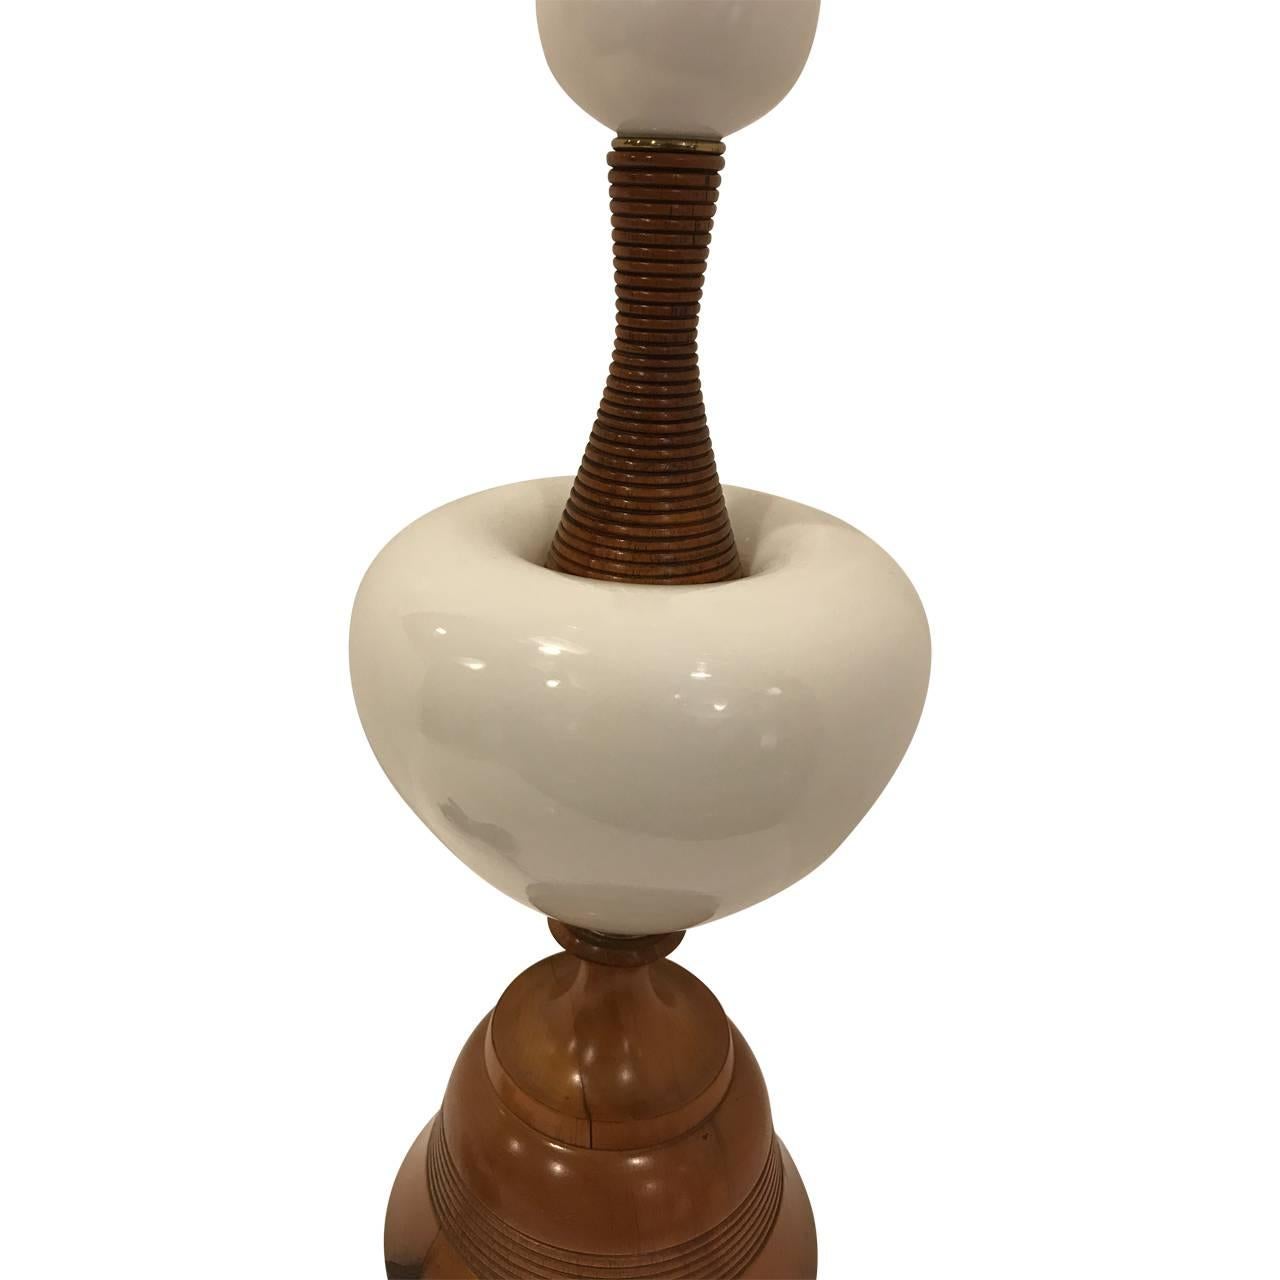 Vintage Opaline white glass and walnut tall table lamp. This striking desk or table lamp has beautifully rounded opaline Charming desk lamp with two white opaline glass centerpieces.